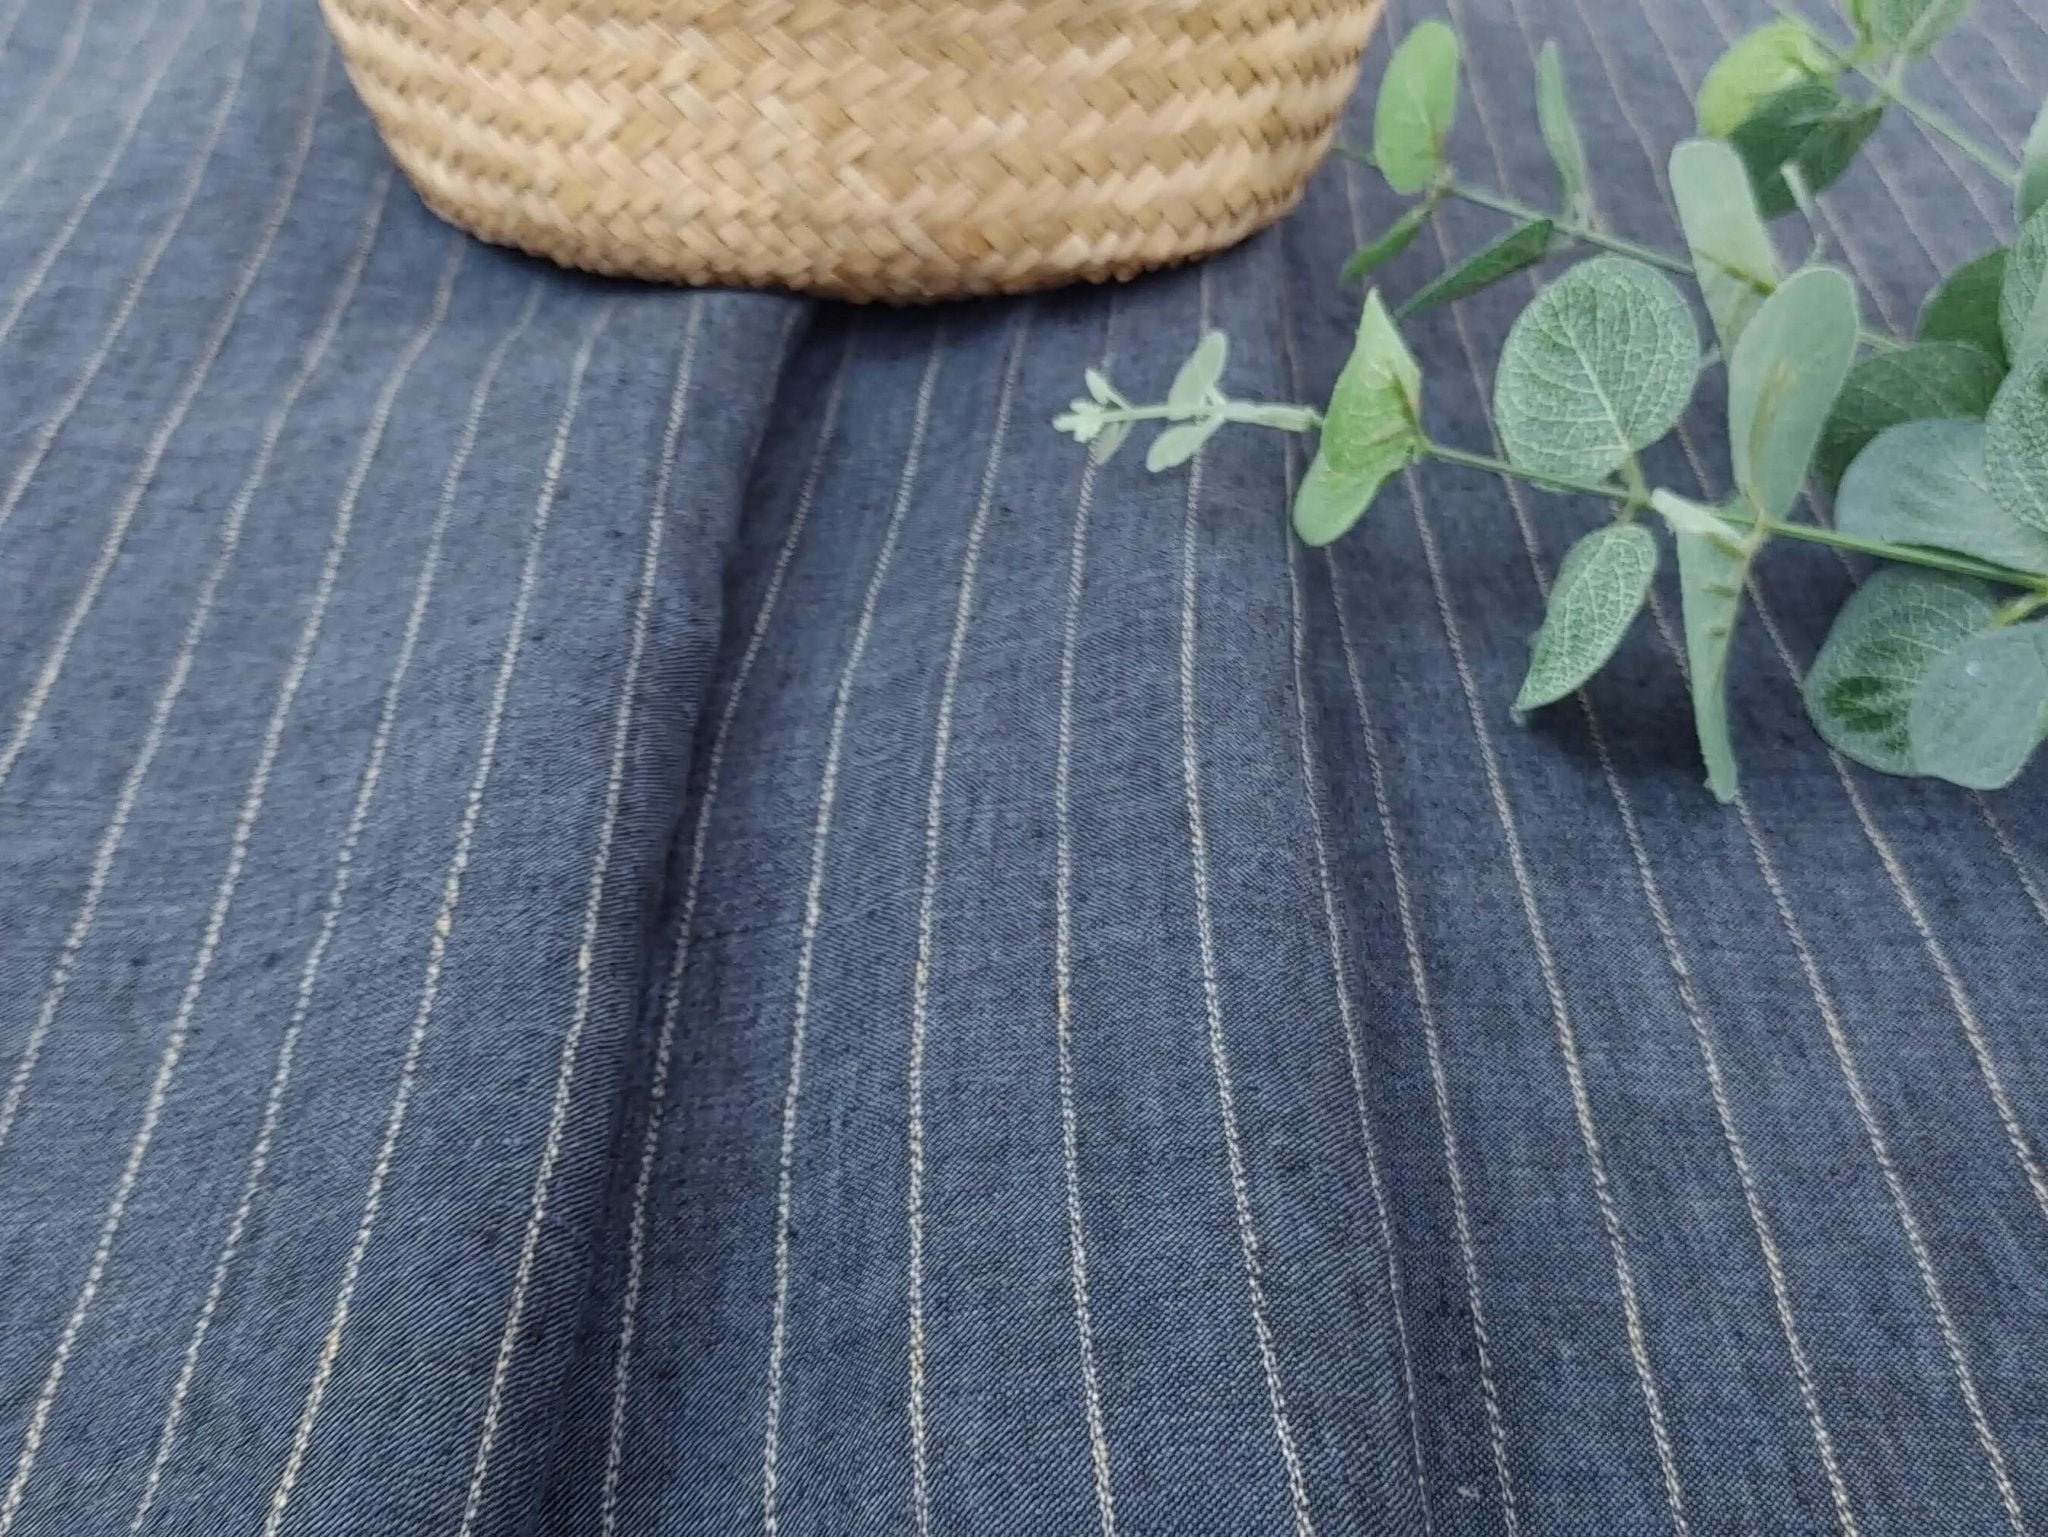 100% Linen Stripe Fabric: Dark Navy with Beige Stripes - Lightweight for Various Projects 7294 - The Linen Lab - Navy